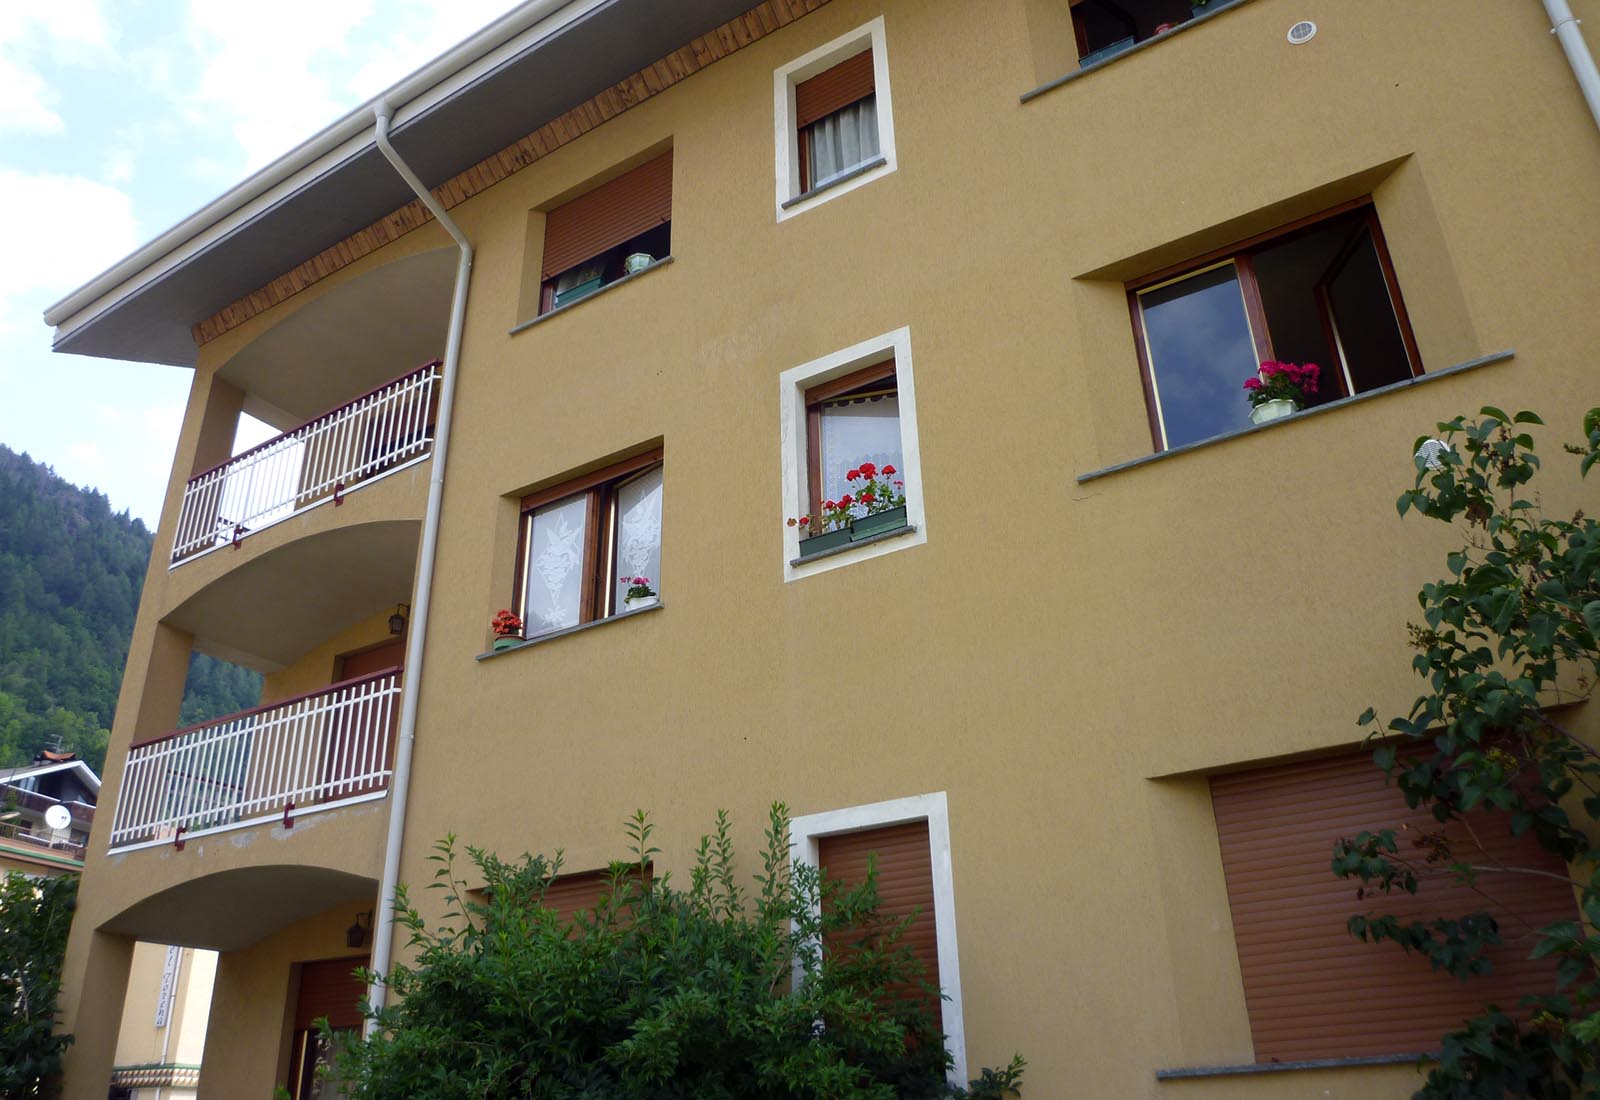 Residential building renovation in Aprica - Detail of the facade